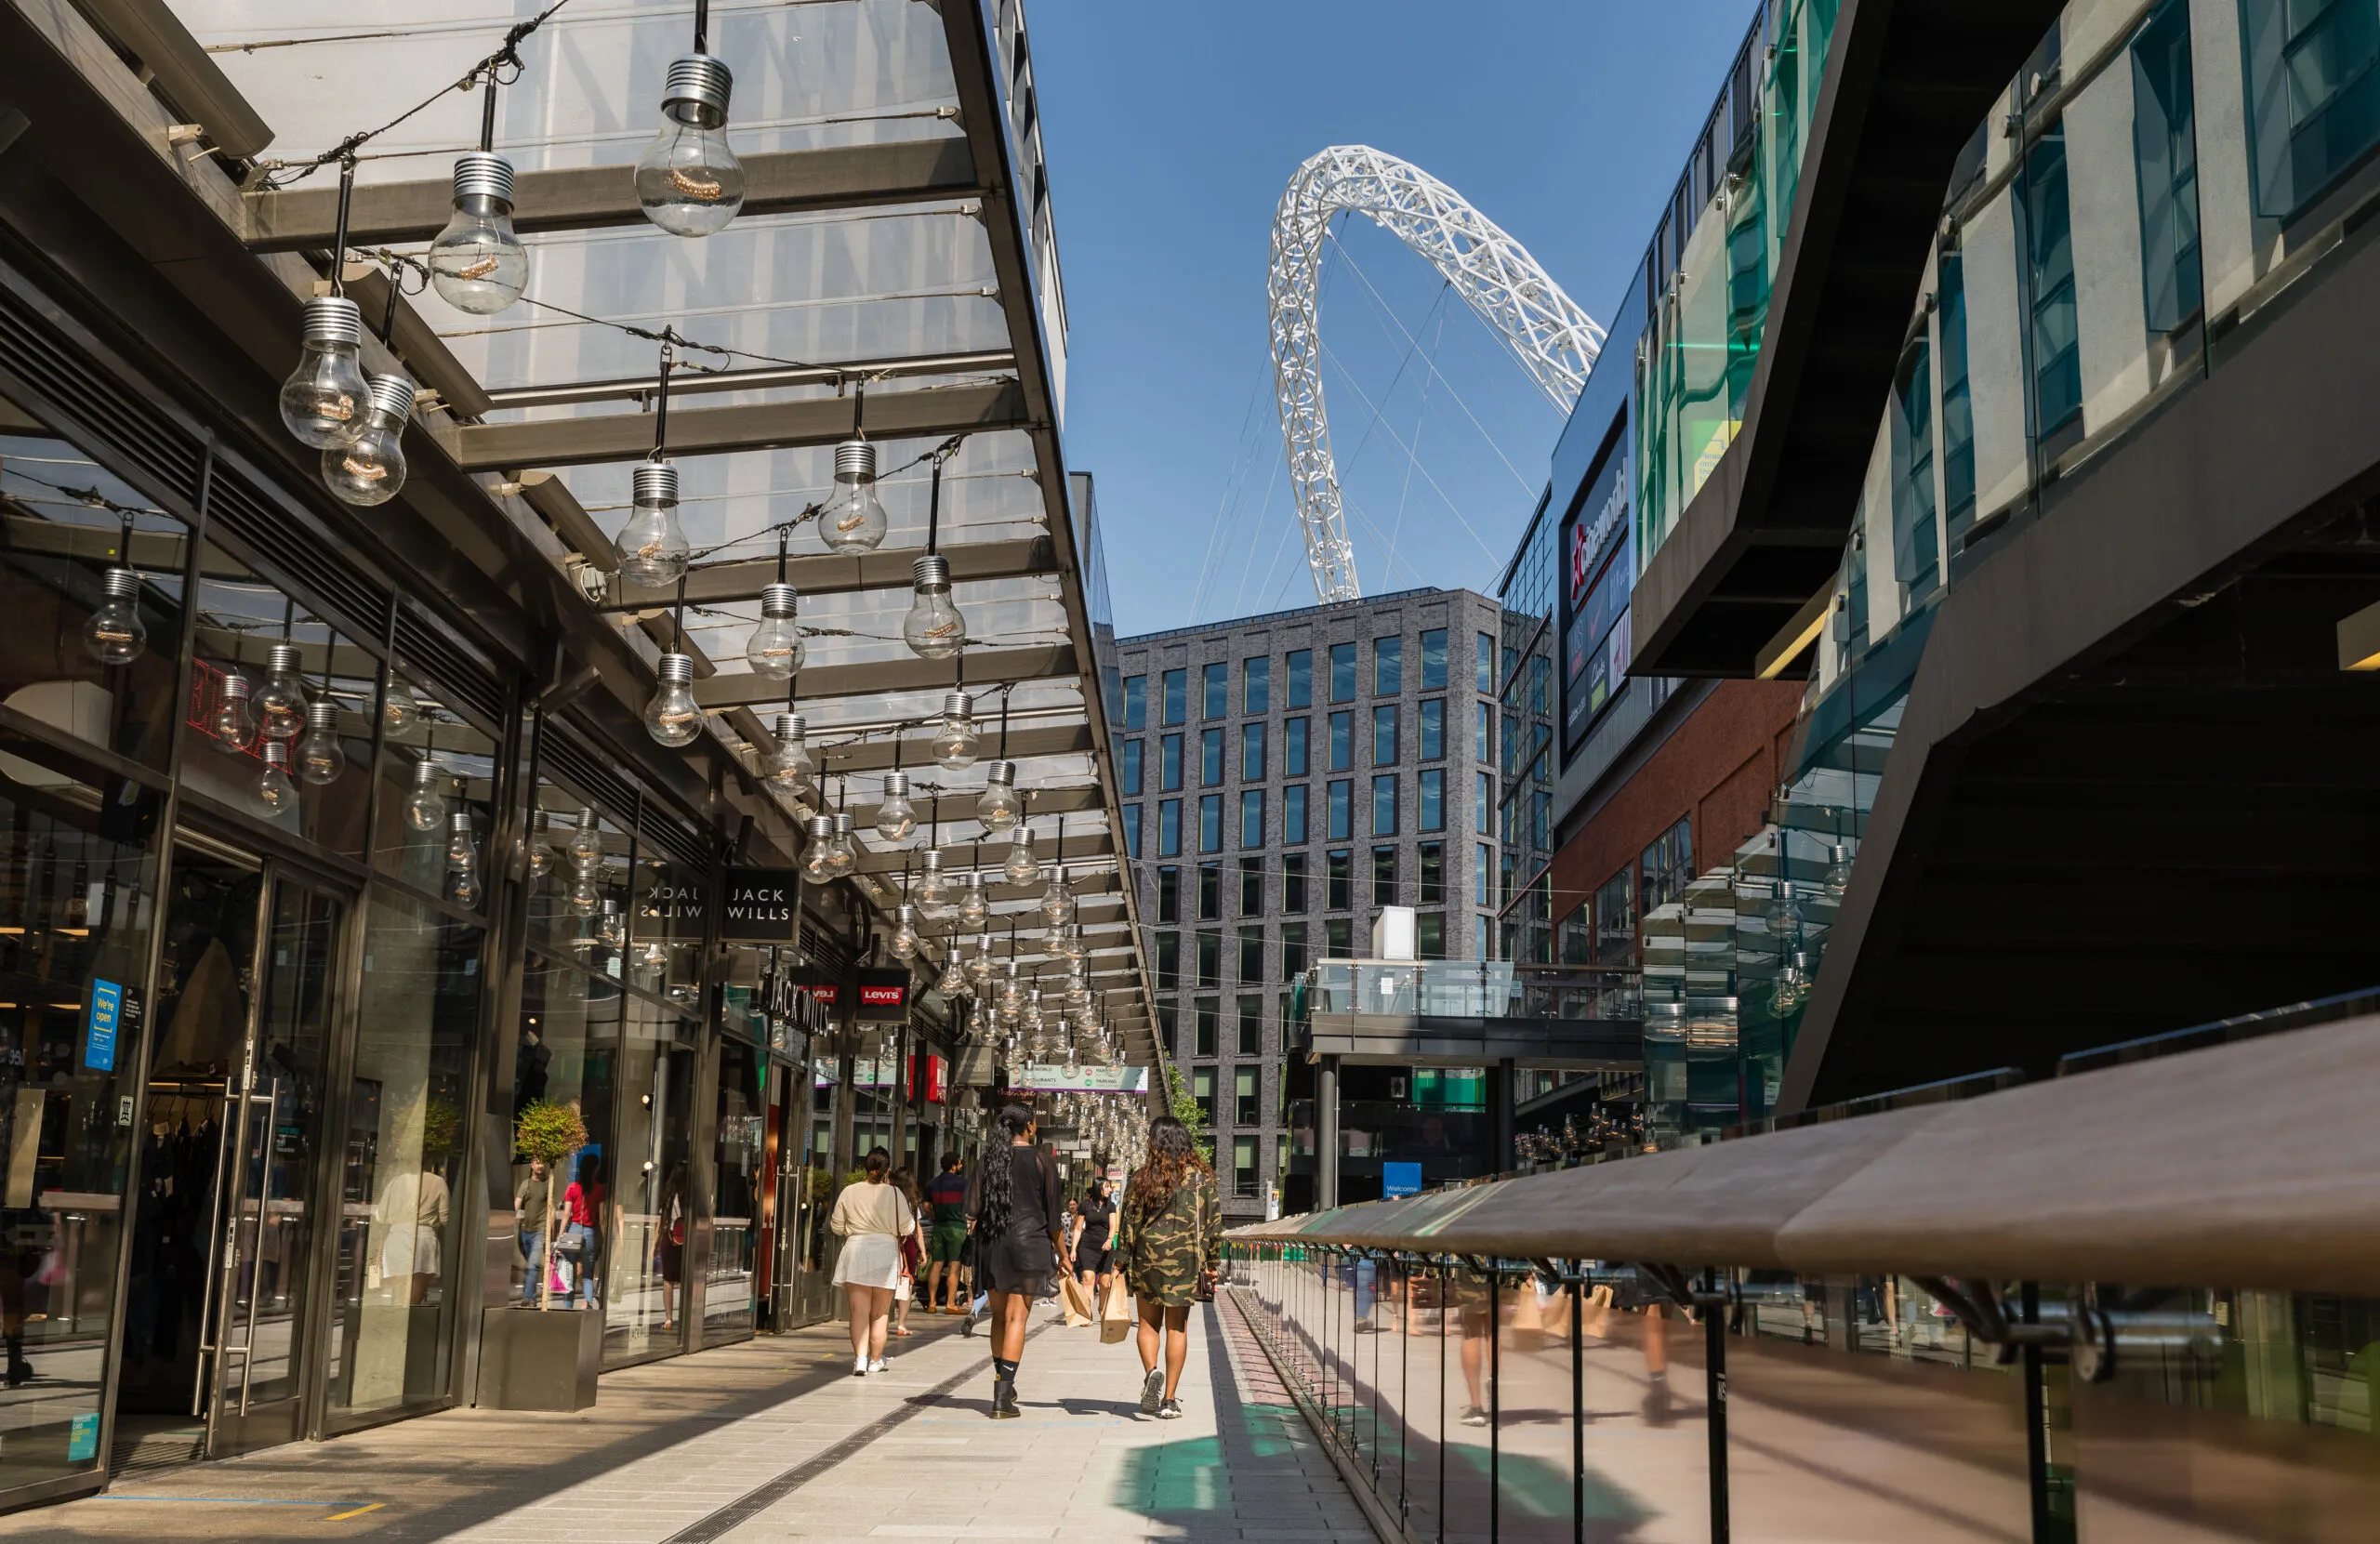 London Designer Outlet in United Kingdom, europe | Handbags,Shoes,Accessories,Clothes,Sportswear,Travel Bags,Swimwear - Country Helper